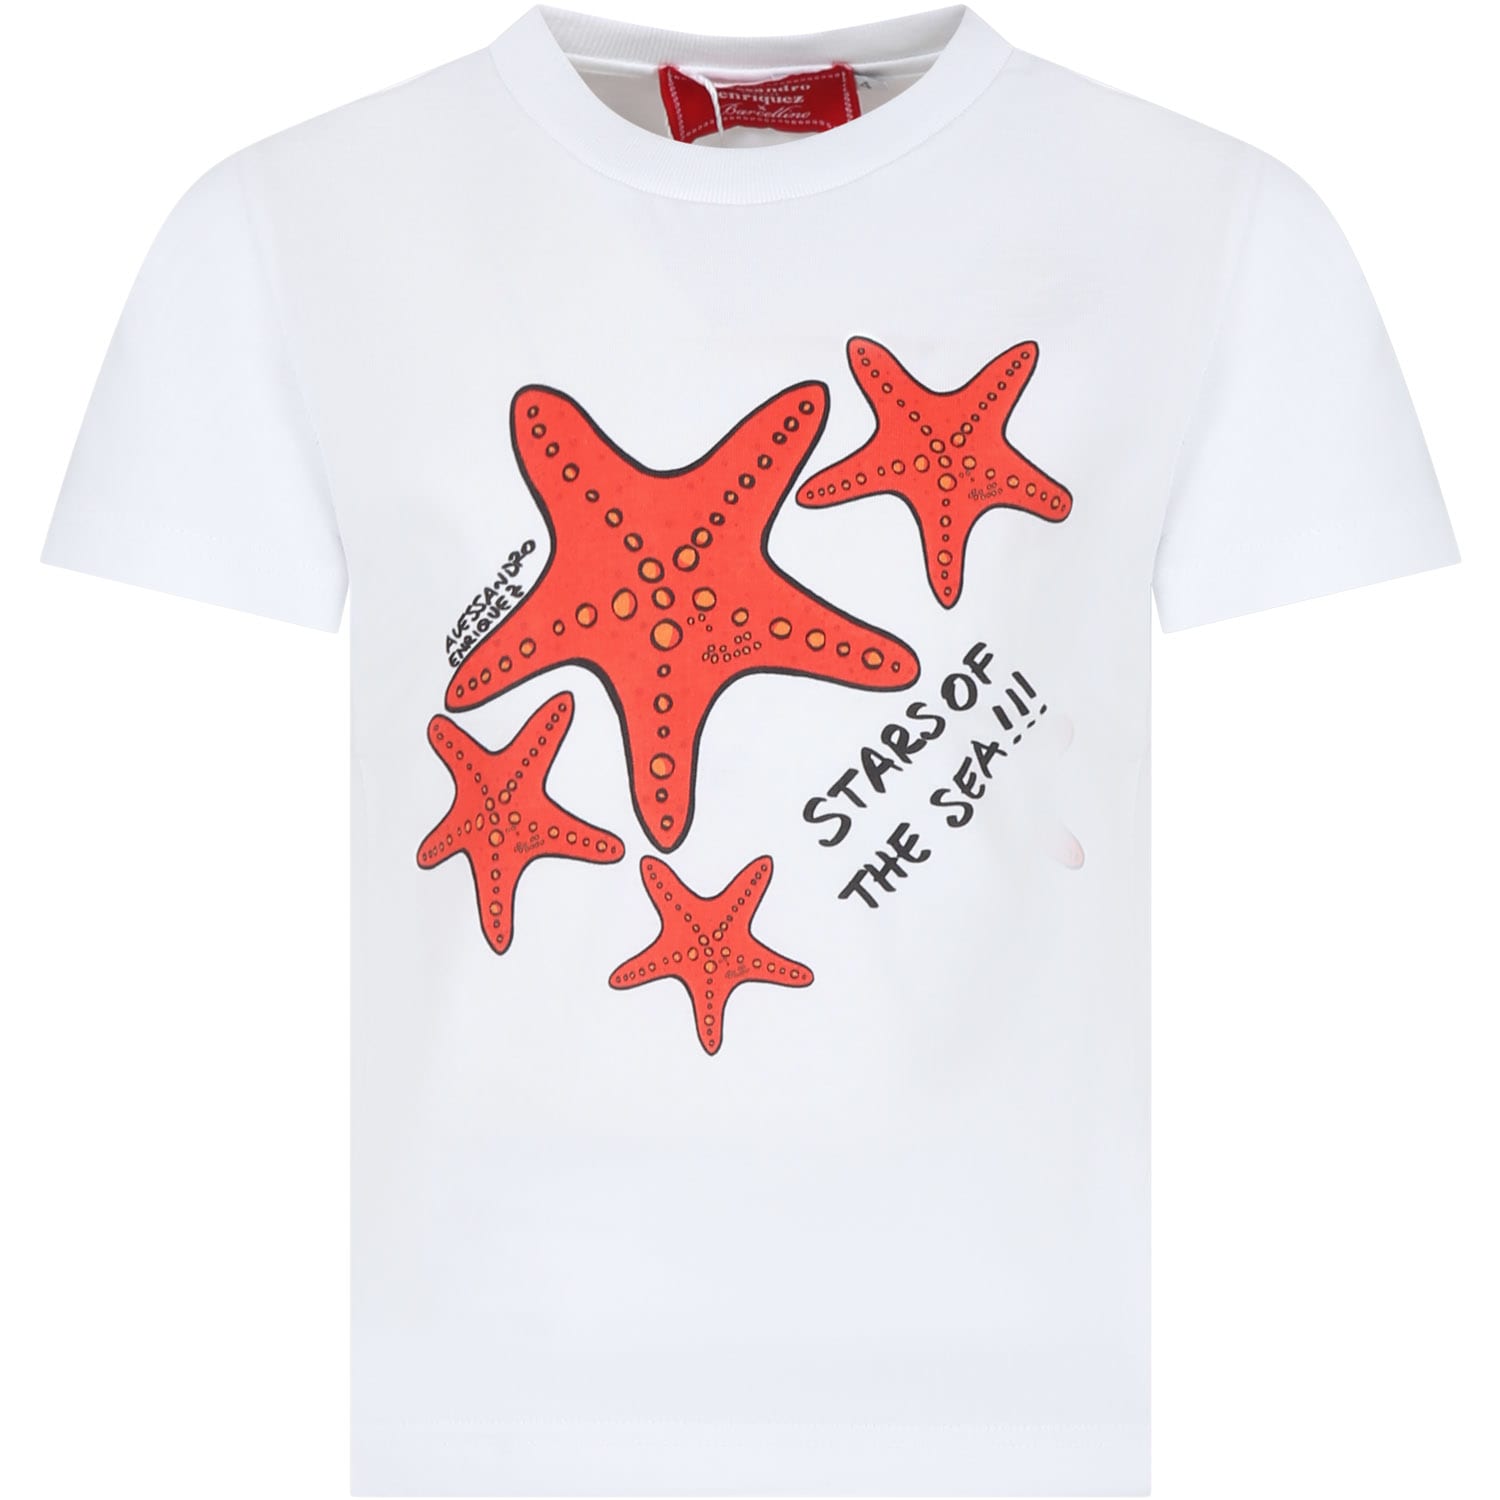 Alessandro Enriquez Kids' White T-shirt For Girl With Print Starfish